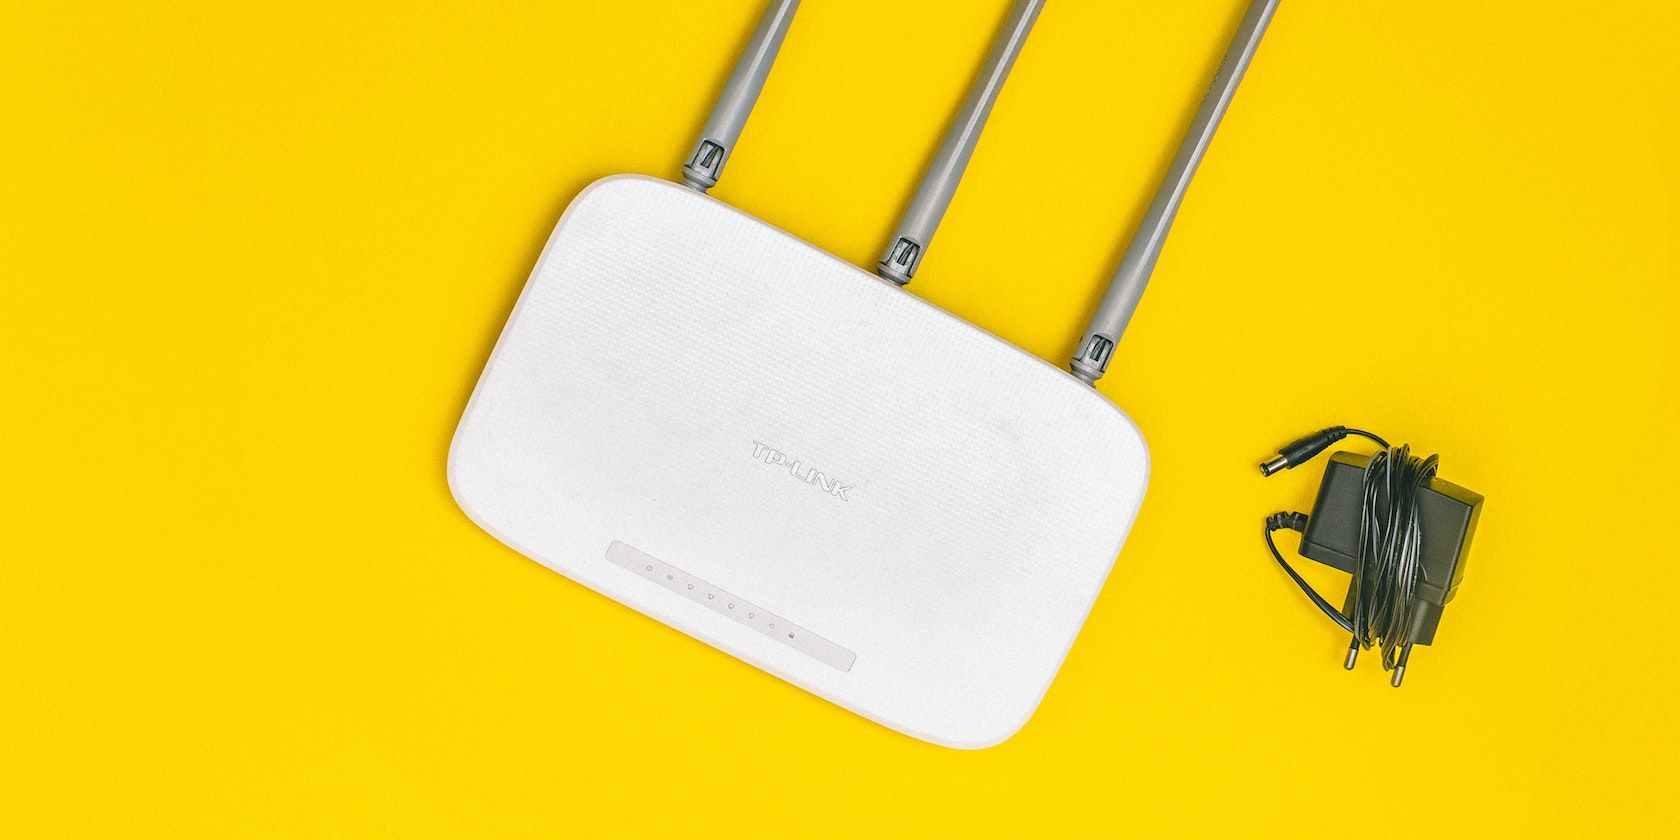 Wi-Fi router and charger on a yellow background